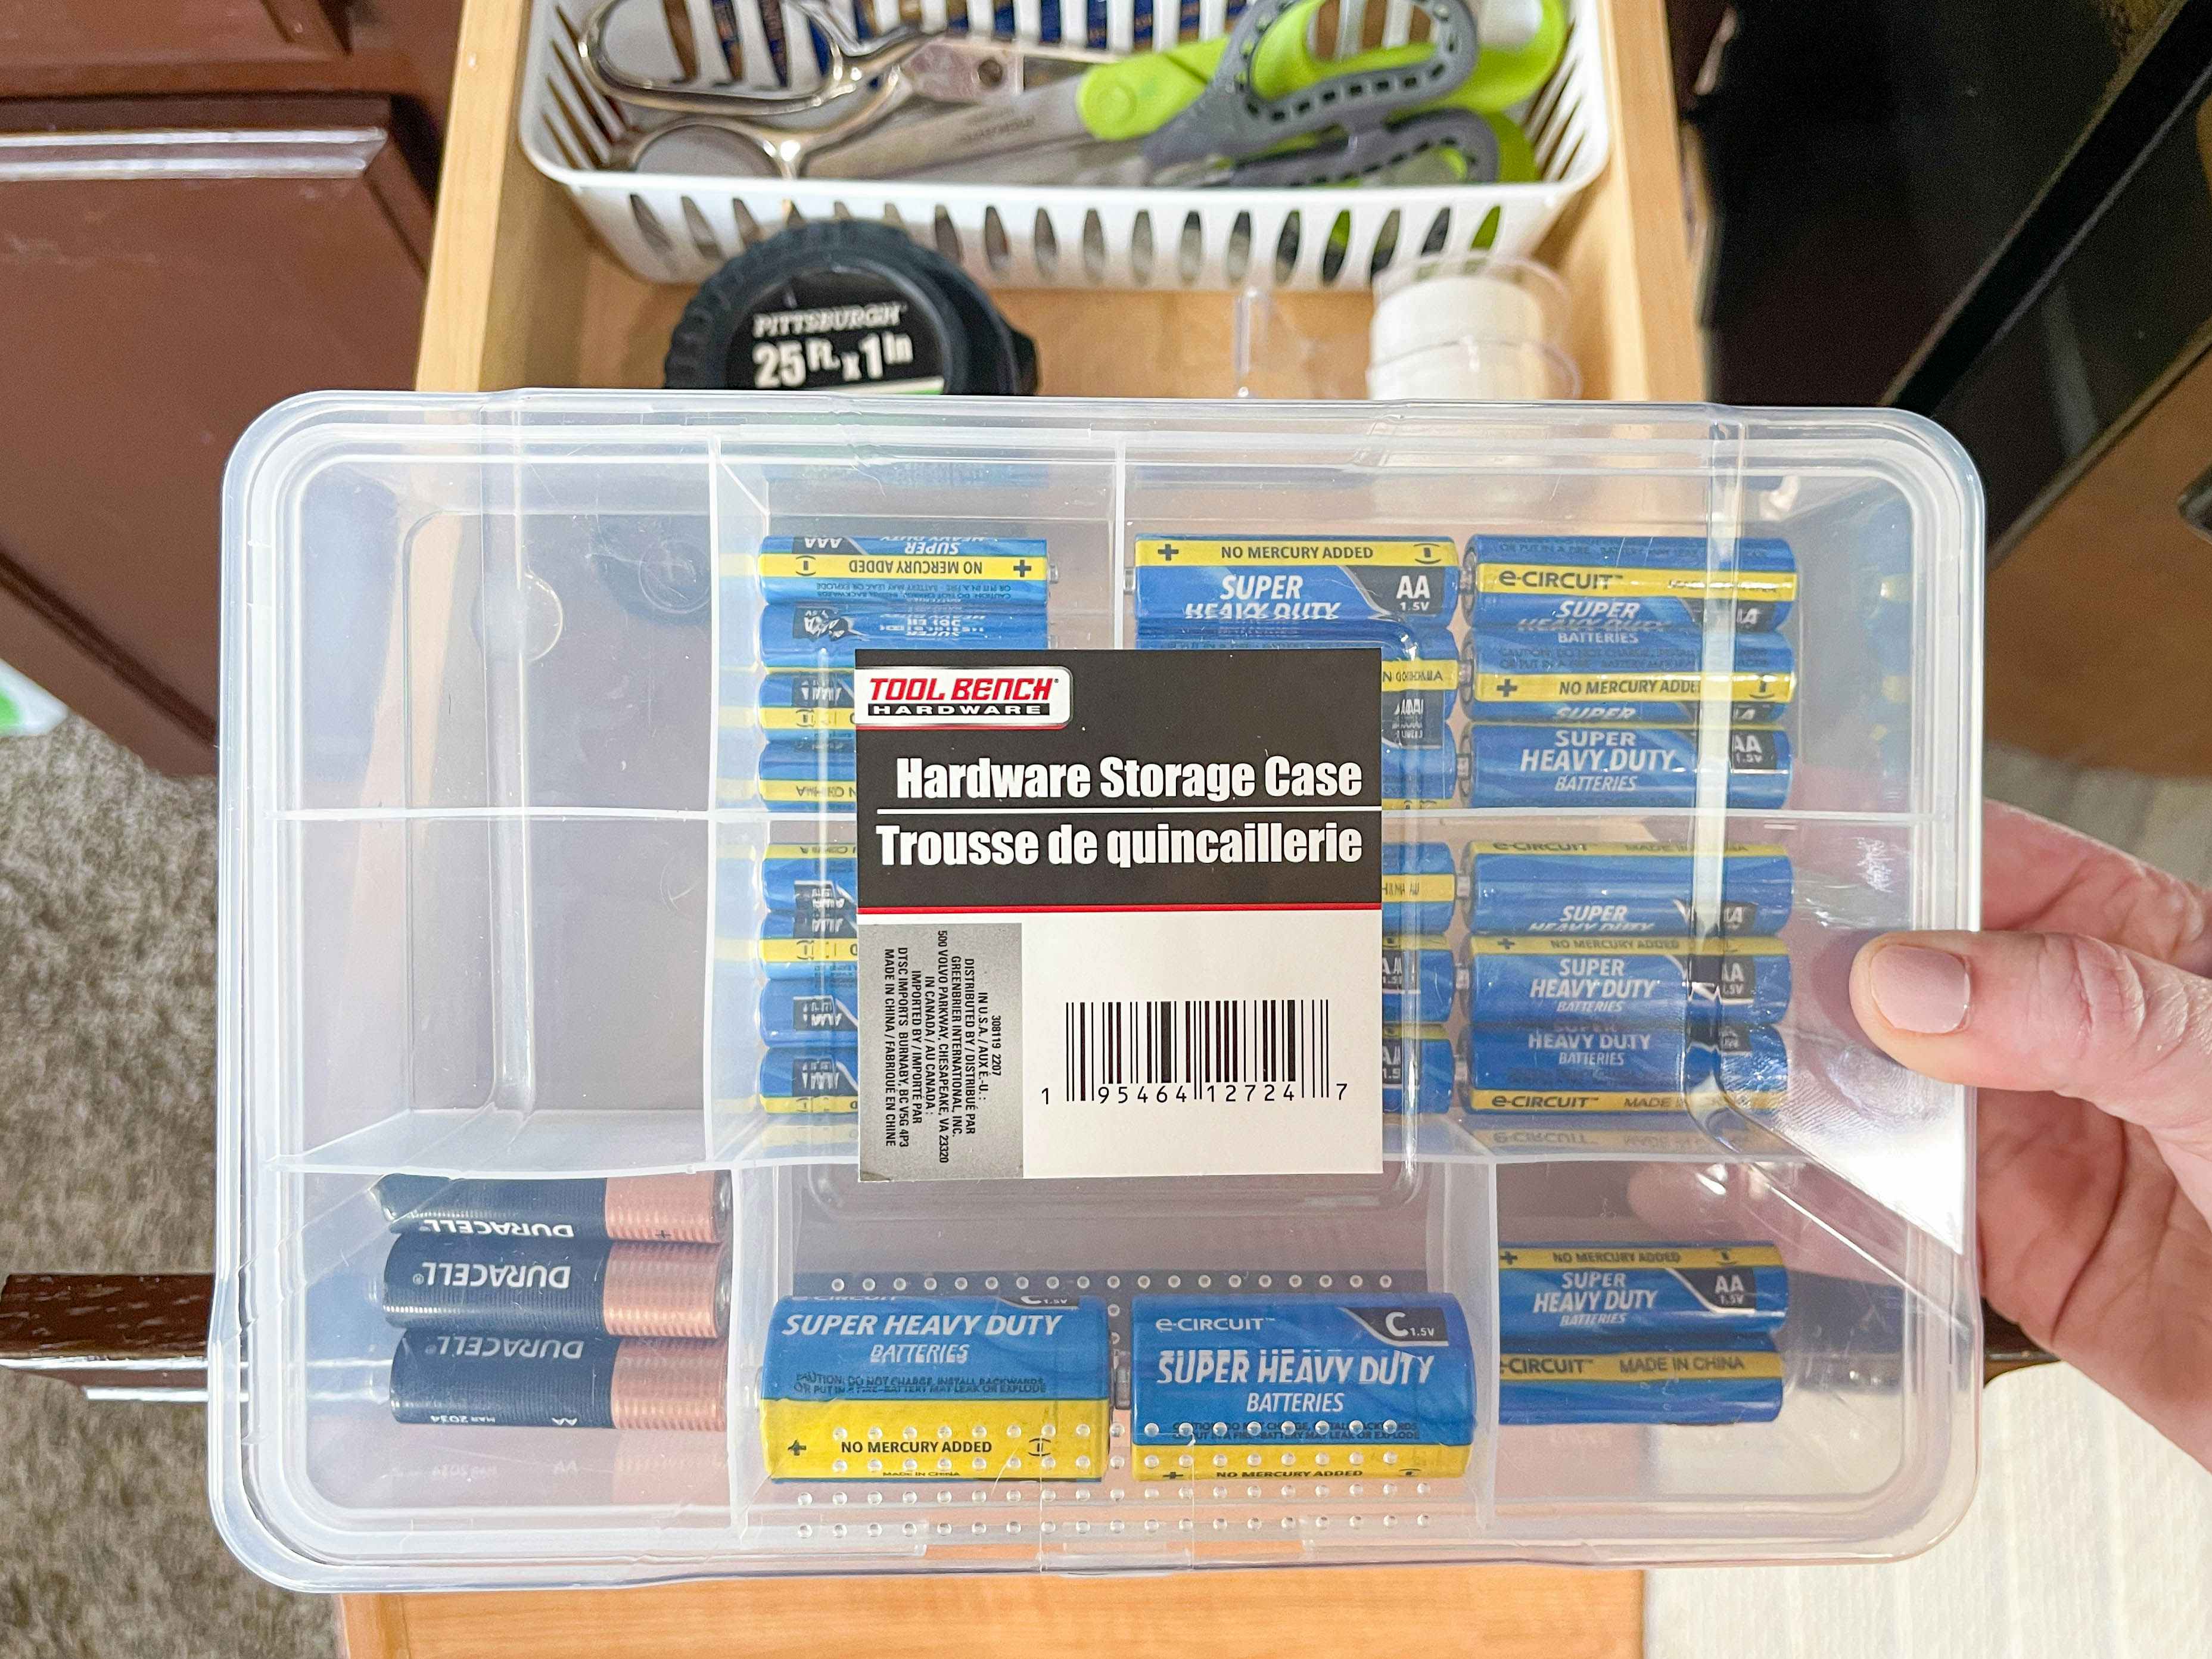 22 Dollar Store Organization Hacks That Are Genius - The Krazy Coupon Lady